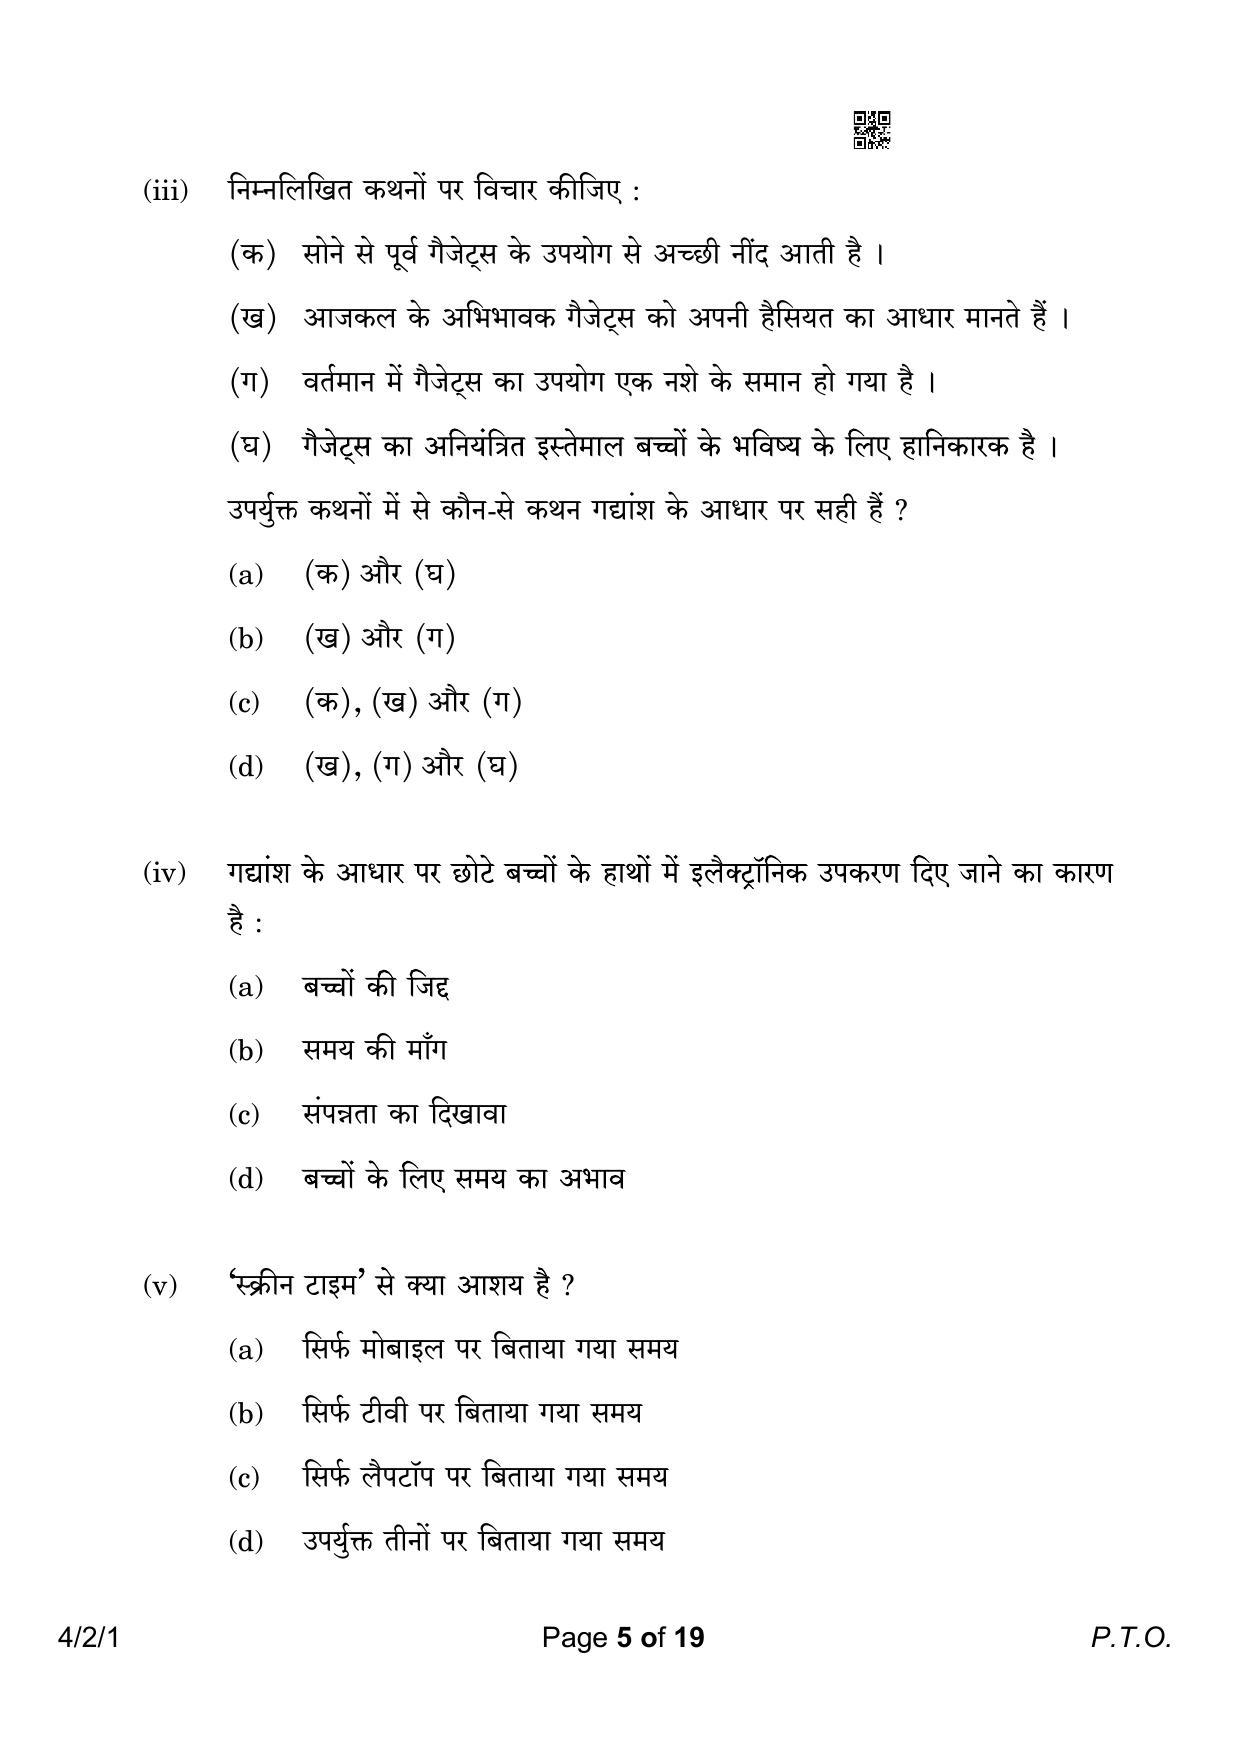 CBSE Class 10 4-2-1 Hindi B 2023 Question Paper - Page 5